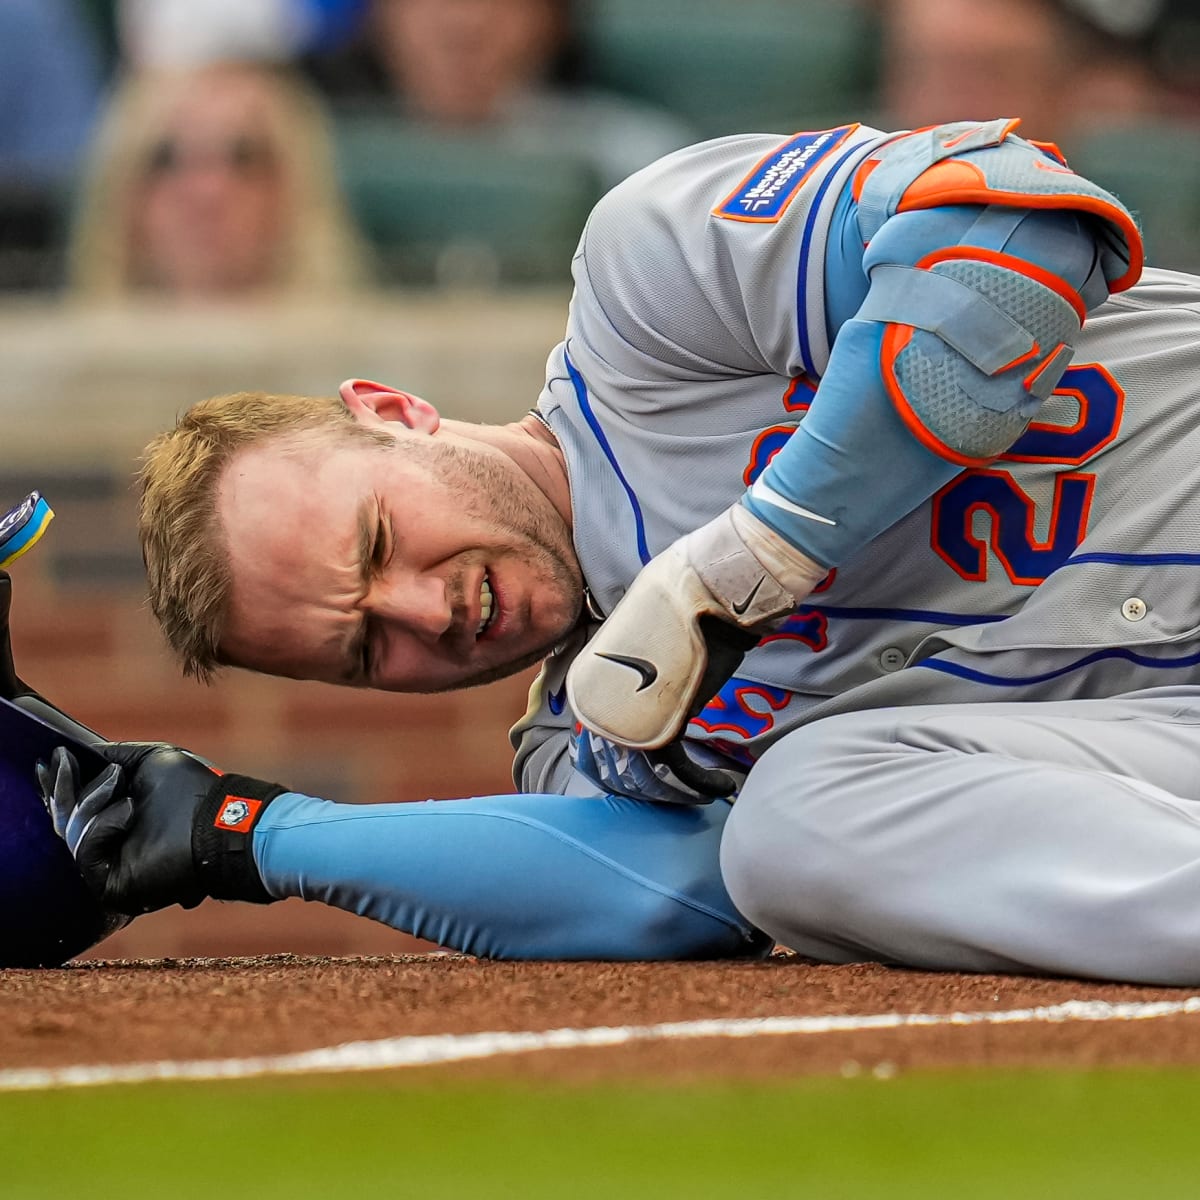 New York Mets OF Starling Marte Exits After Hit by Pitch - Sports